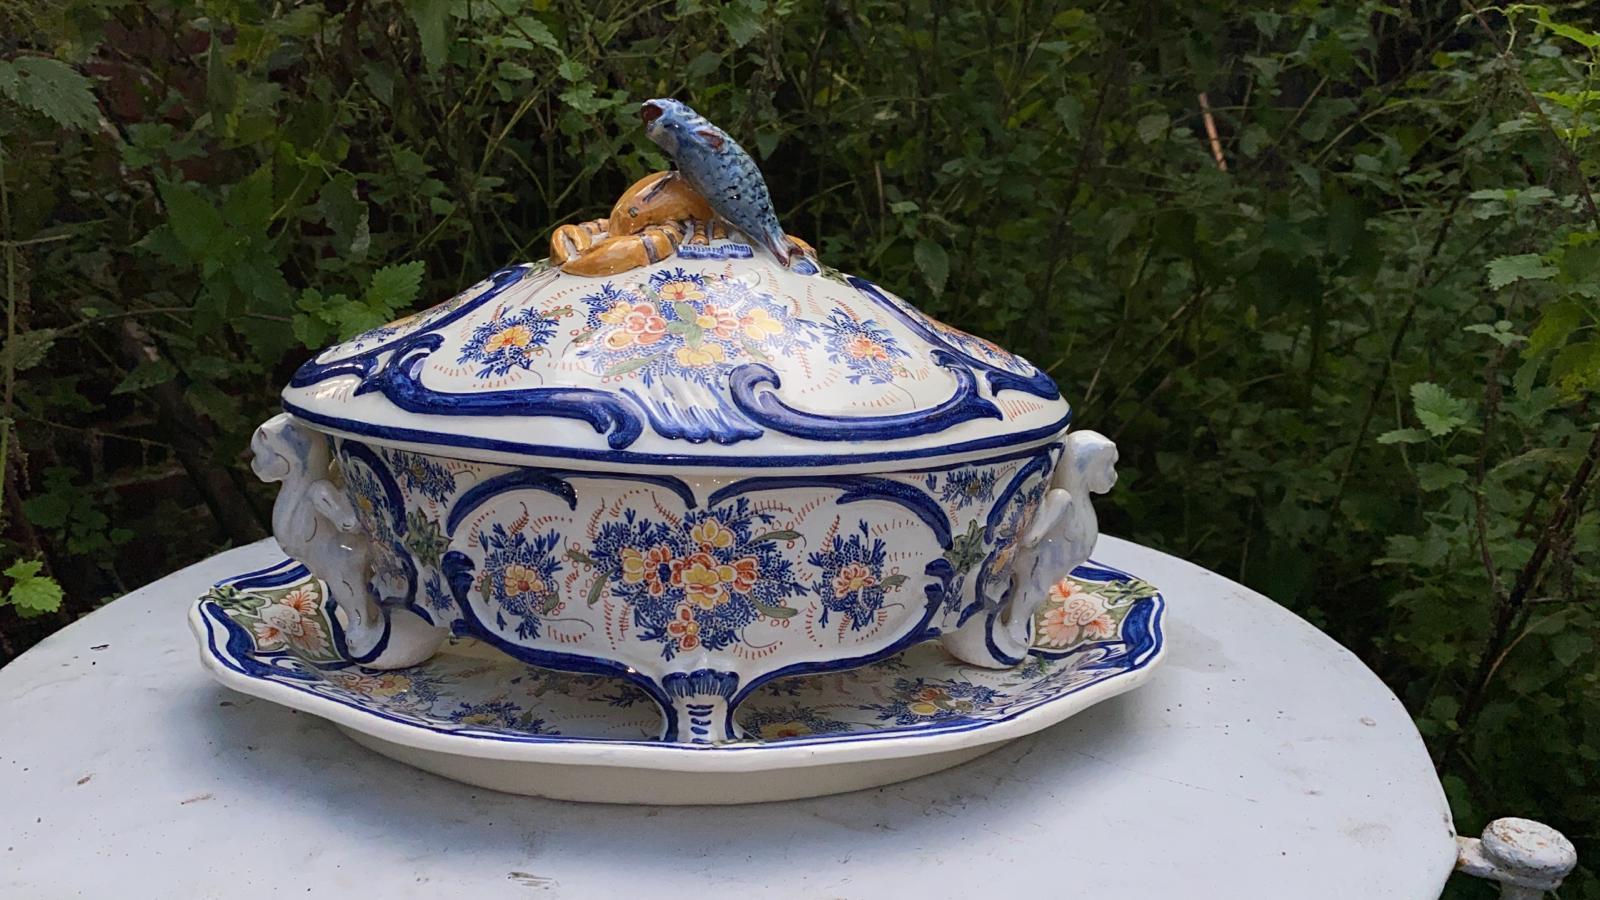 Faience Soup Tureen Delft, circa 1930.
Chinoiserie scene on the platter , handle with fish and lobster.
Platter 17.5 by 13.3 inches.
Height / 11.5 inches.